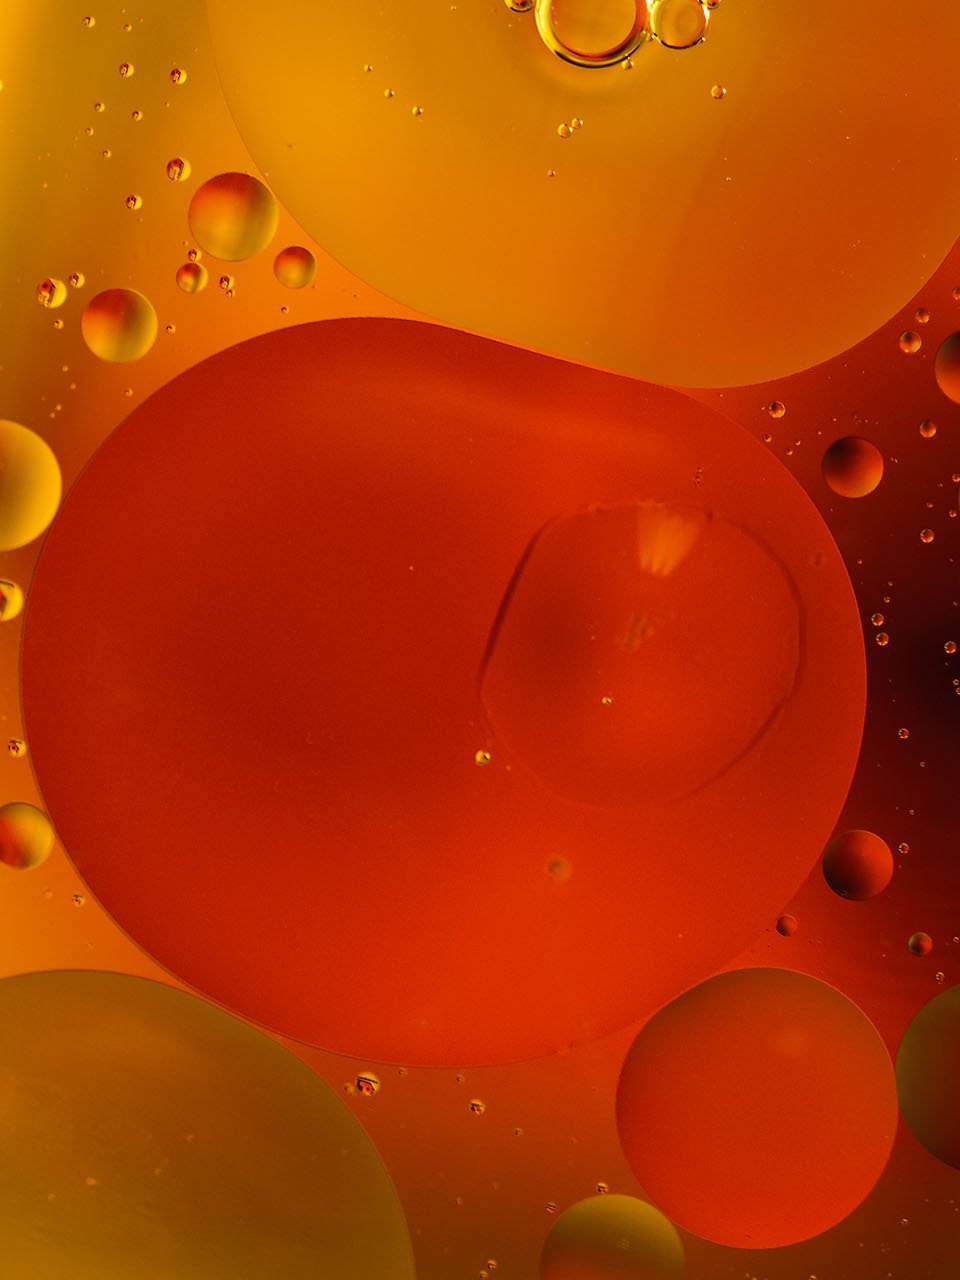 Close ups of air bubbles in the lubricating oil